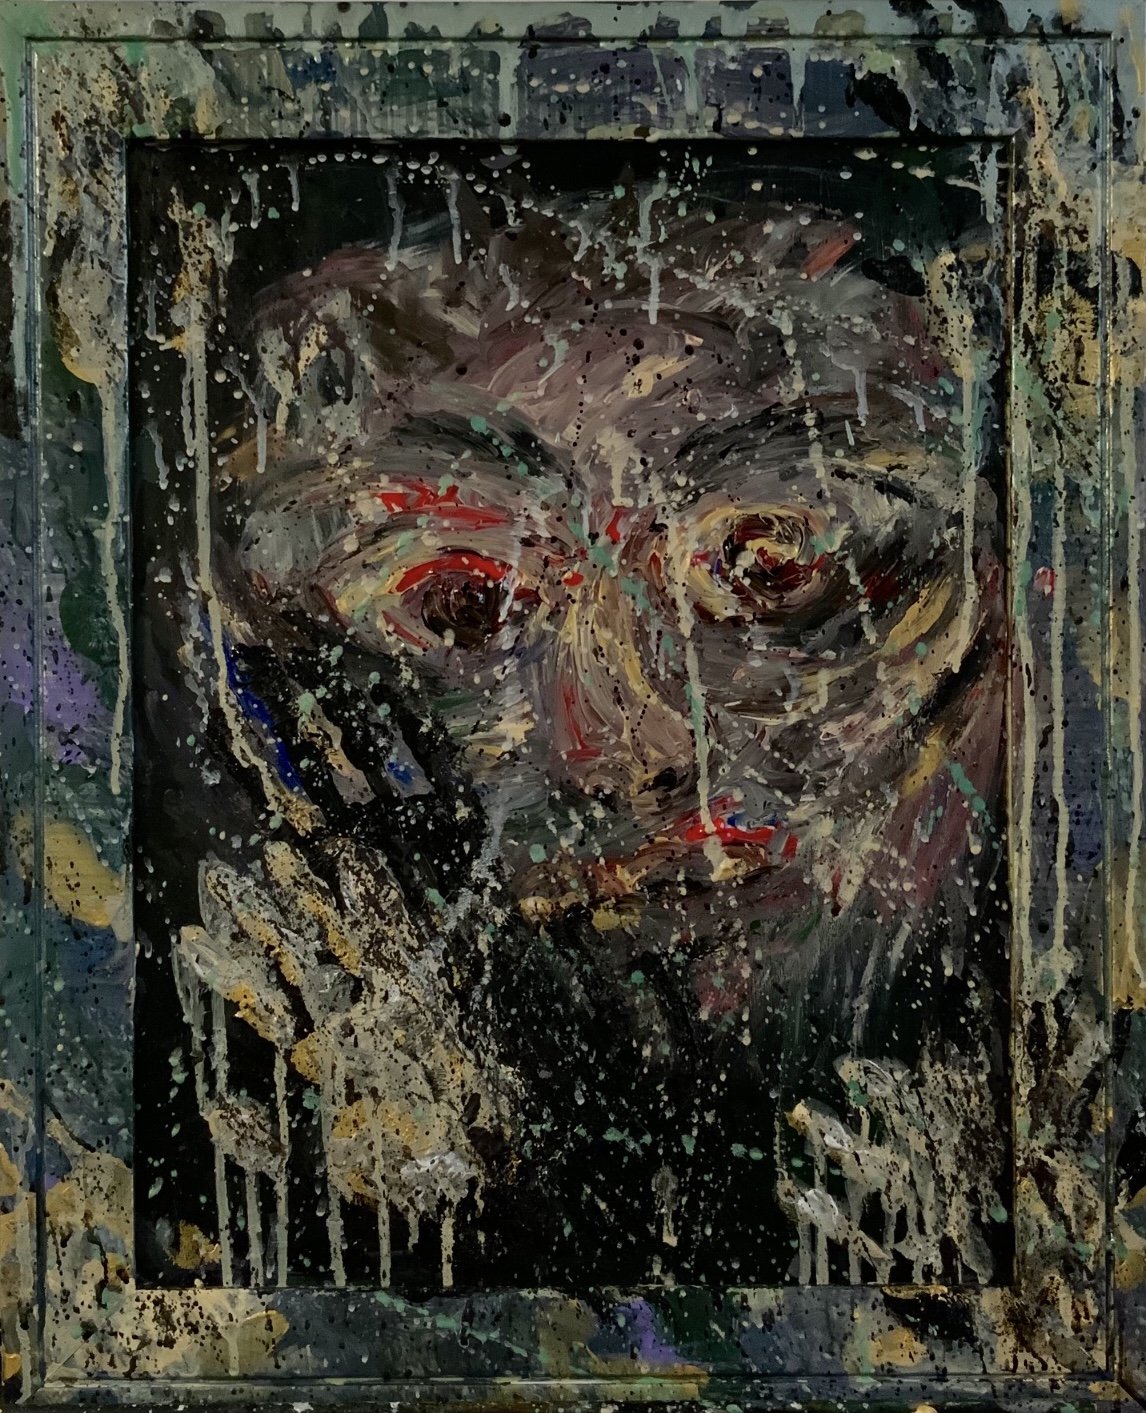 Self-portrait, Height: 54.5 cm x width: 44.5 cm, Acrylic paint and ink on frame, 2021.